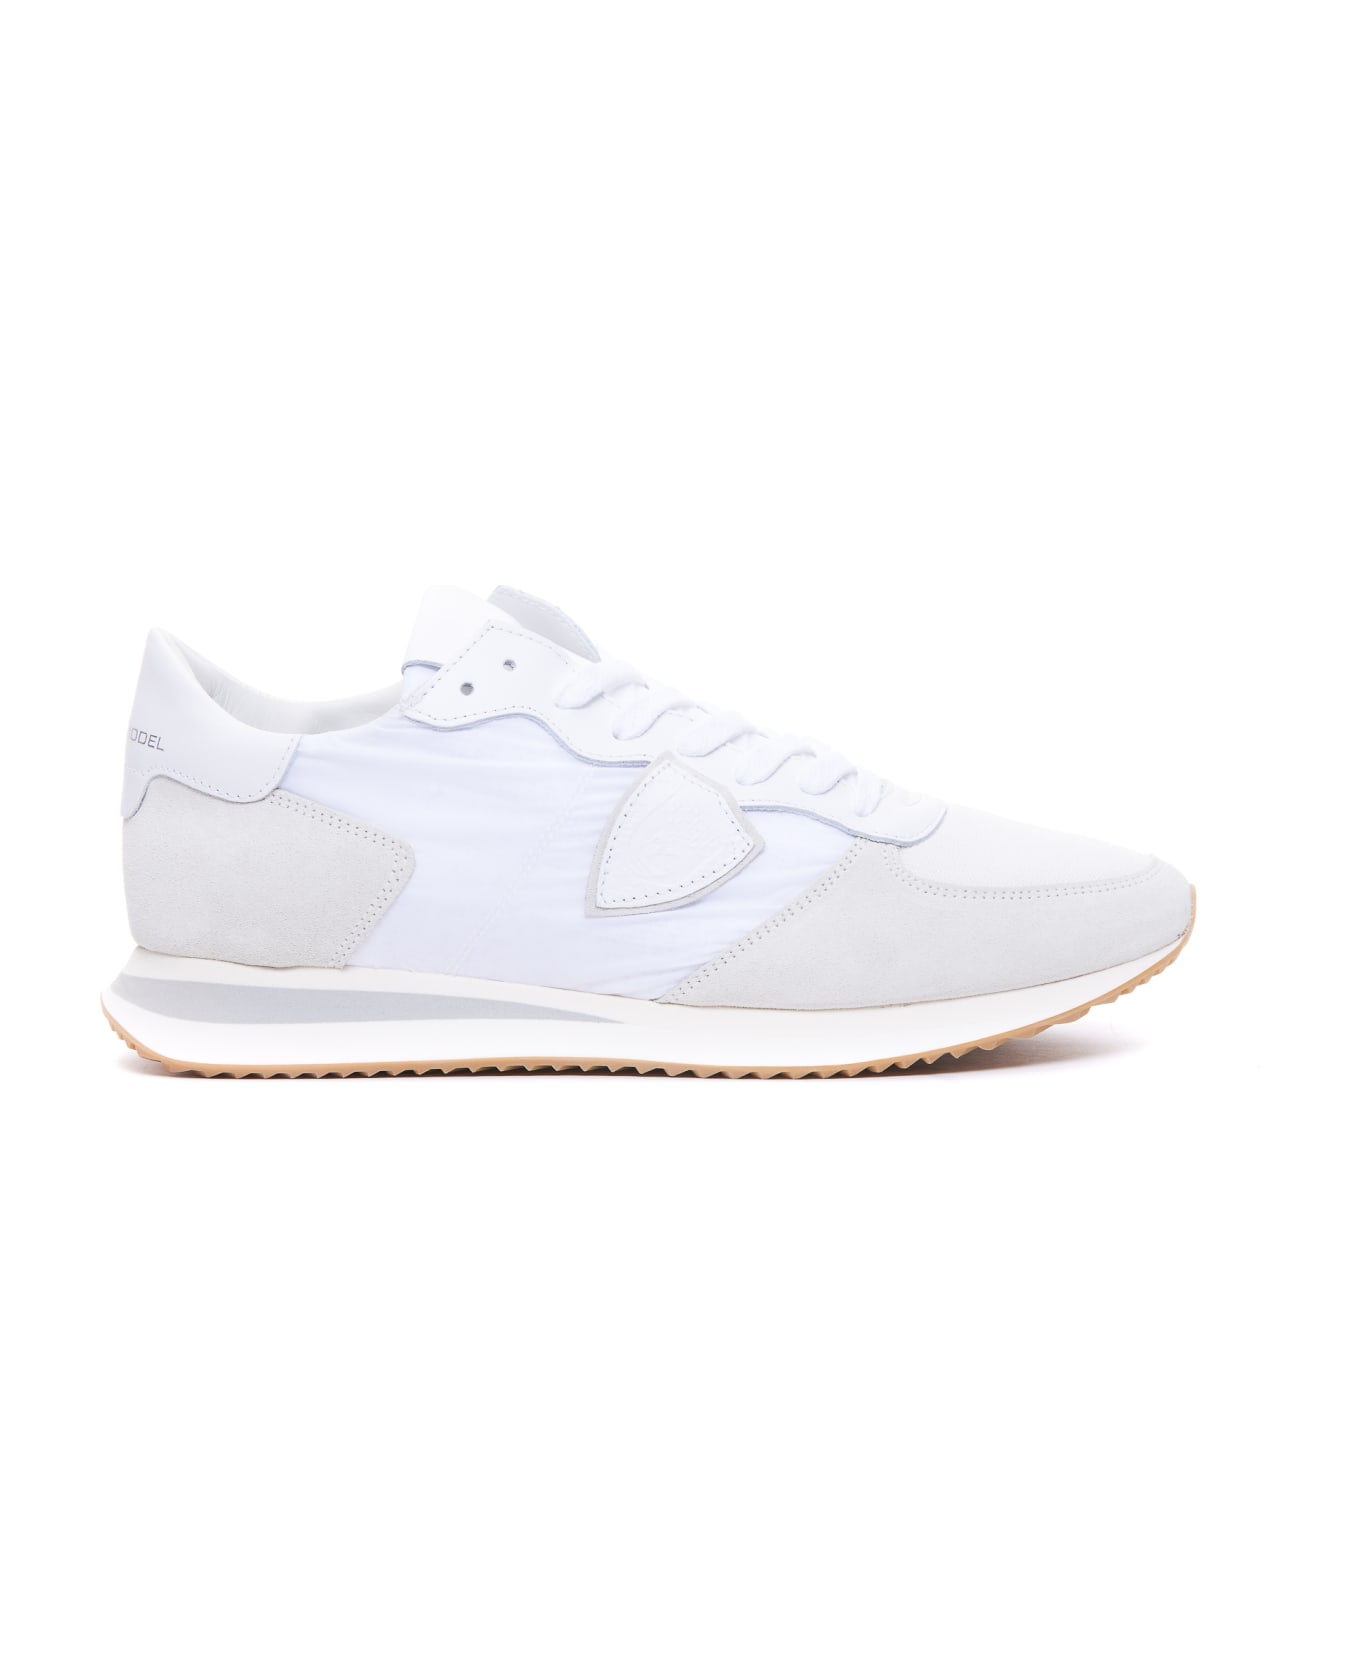 Philippe Model Tropez Low Sneakers - White